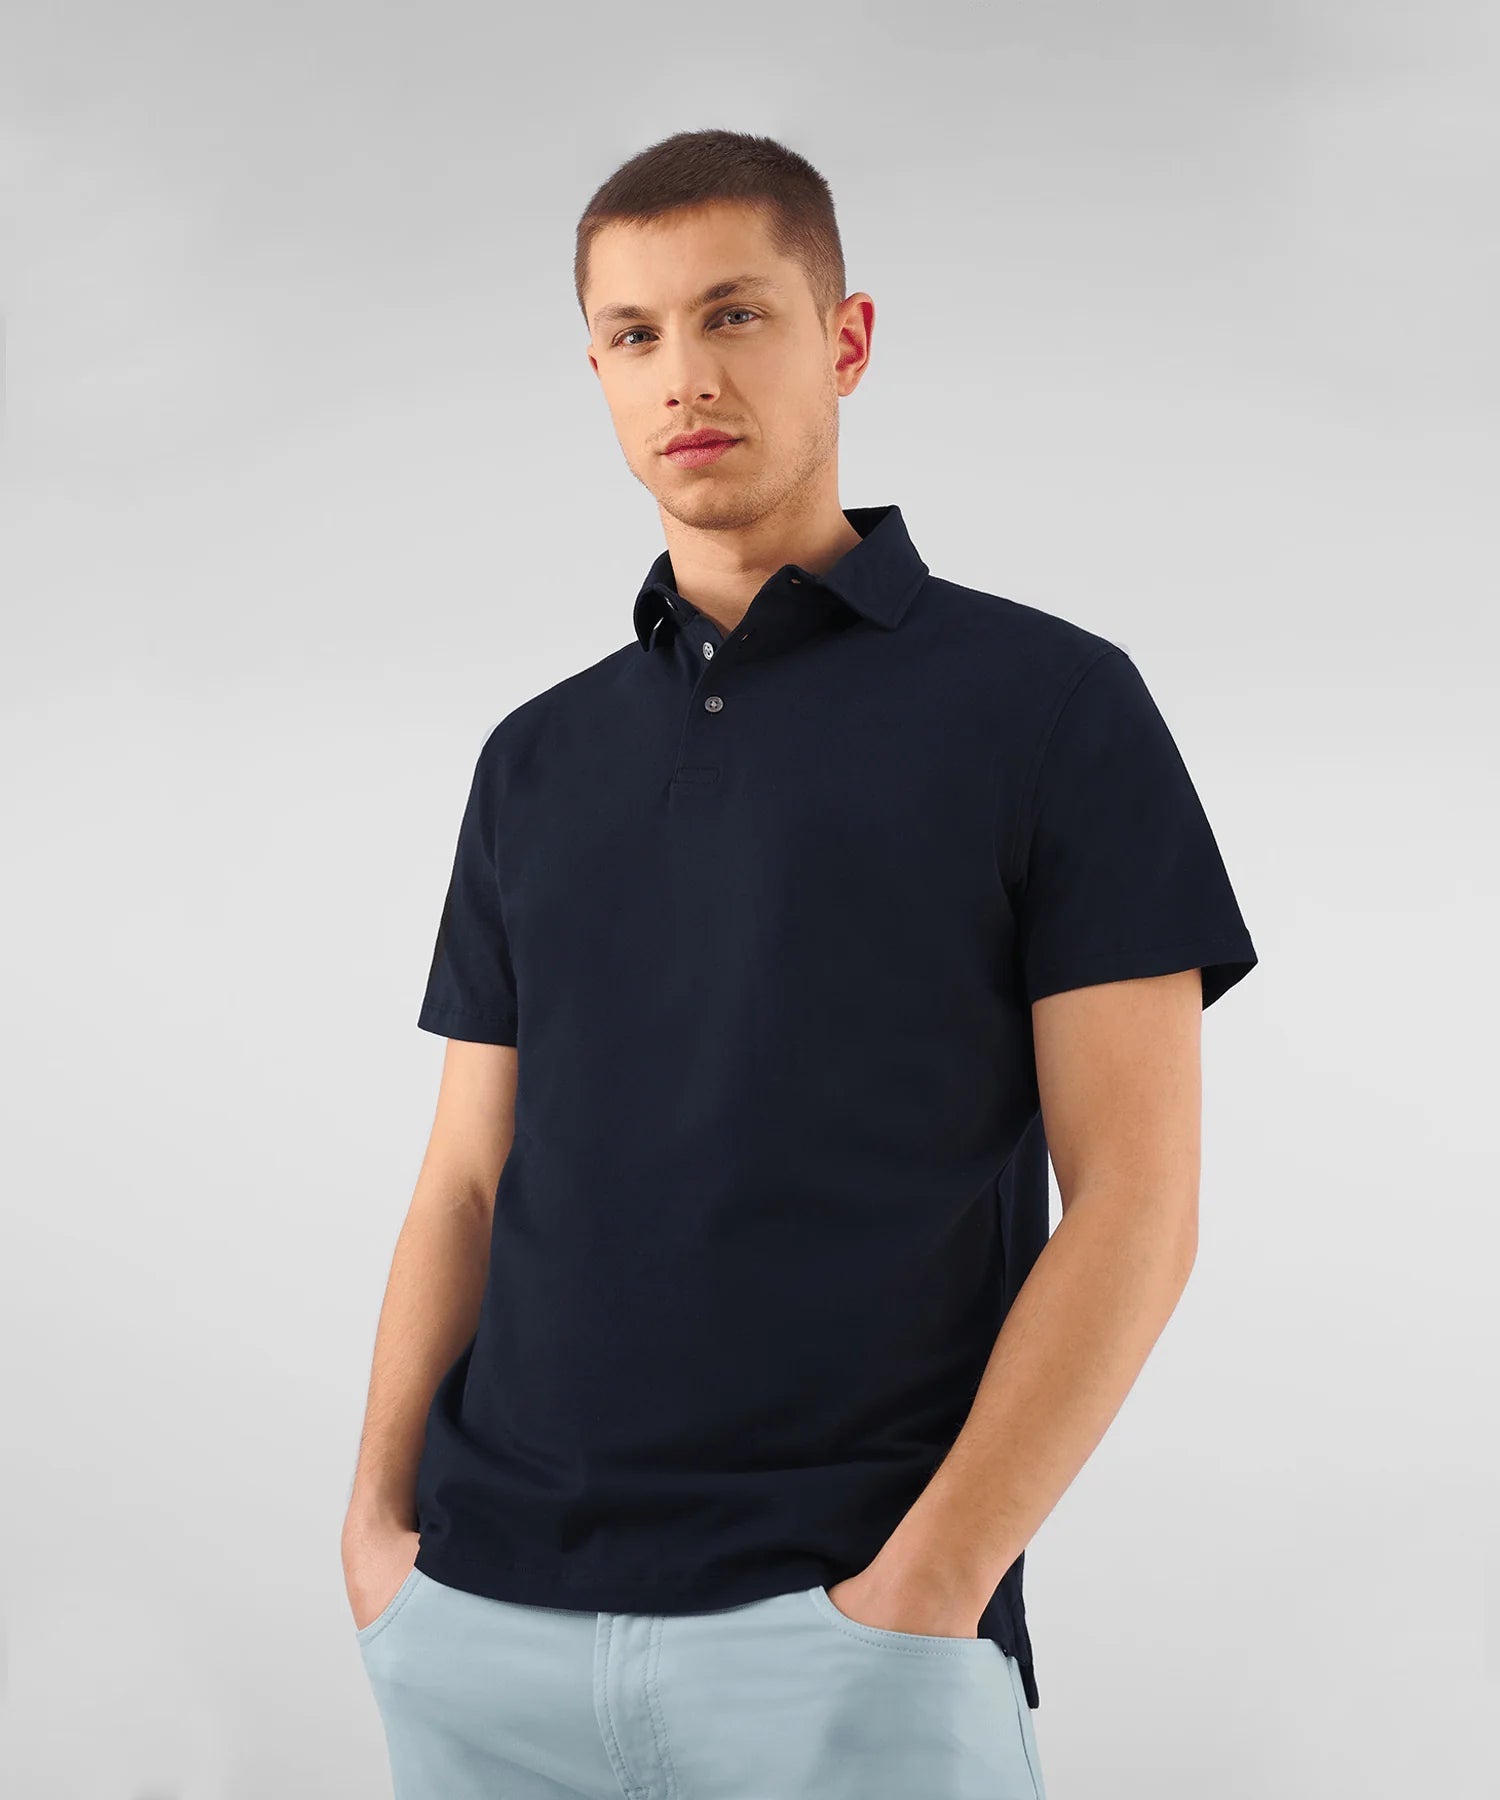 The Essential Polo